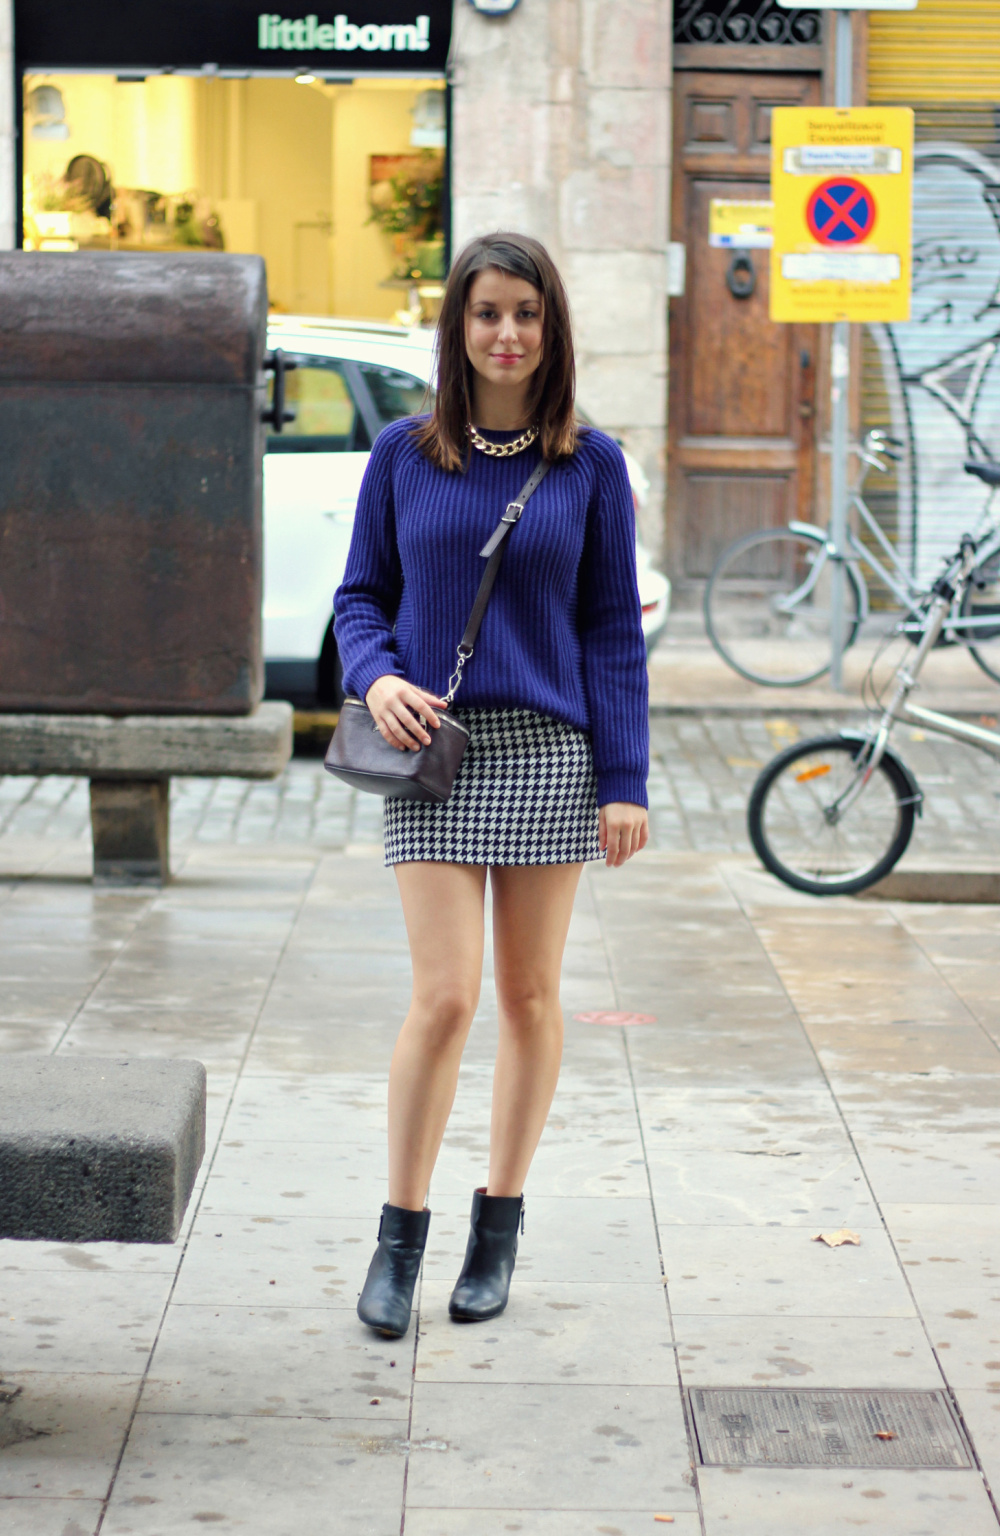 heels in prague | blog by adela stredova: time for sweaters and mini ...